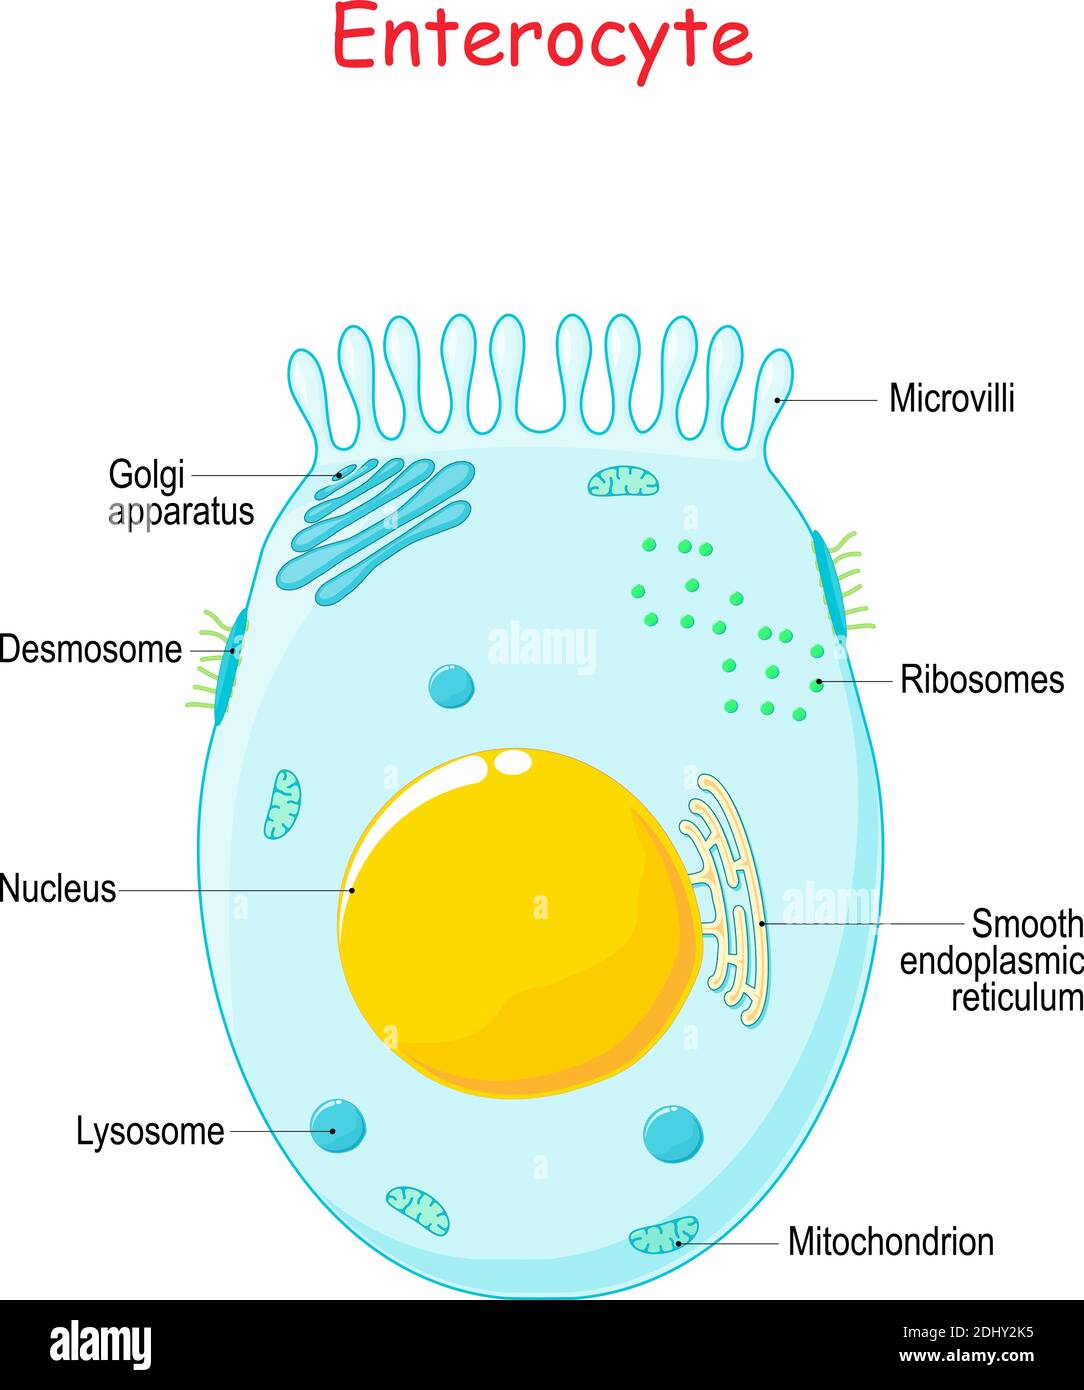 Enterocyte. intestinal absorptive epithelial cell with microvilli. Structure of the enterocyte. Infographics. Vector illustration on white background. Stock Vector